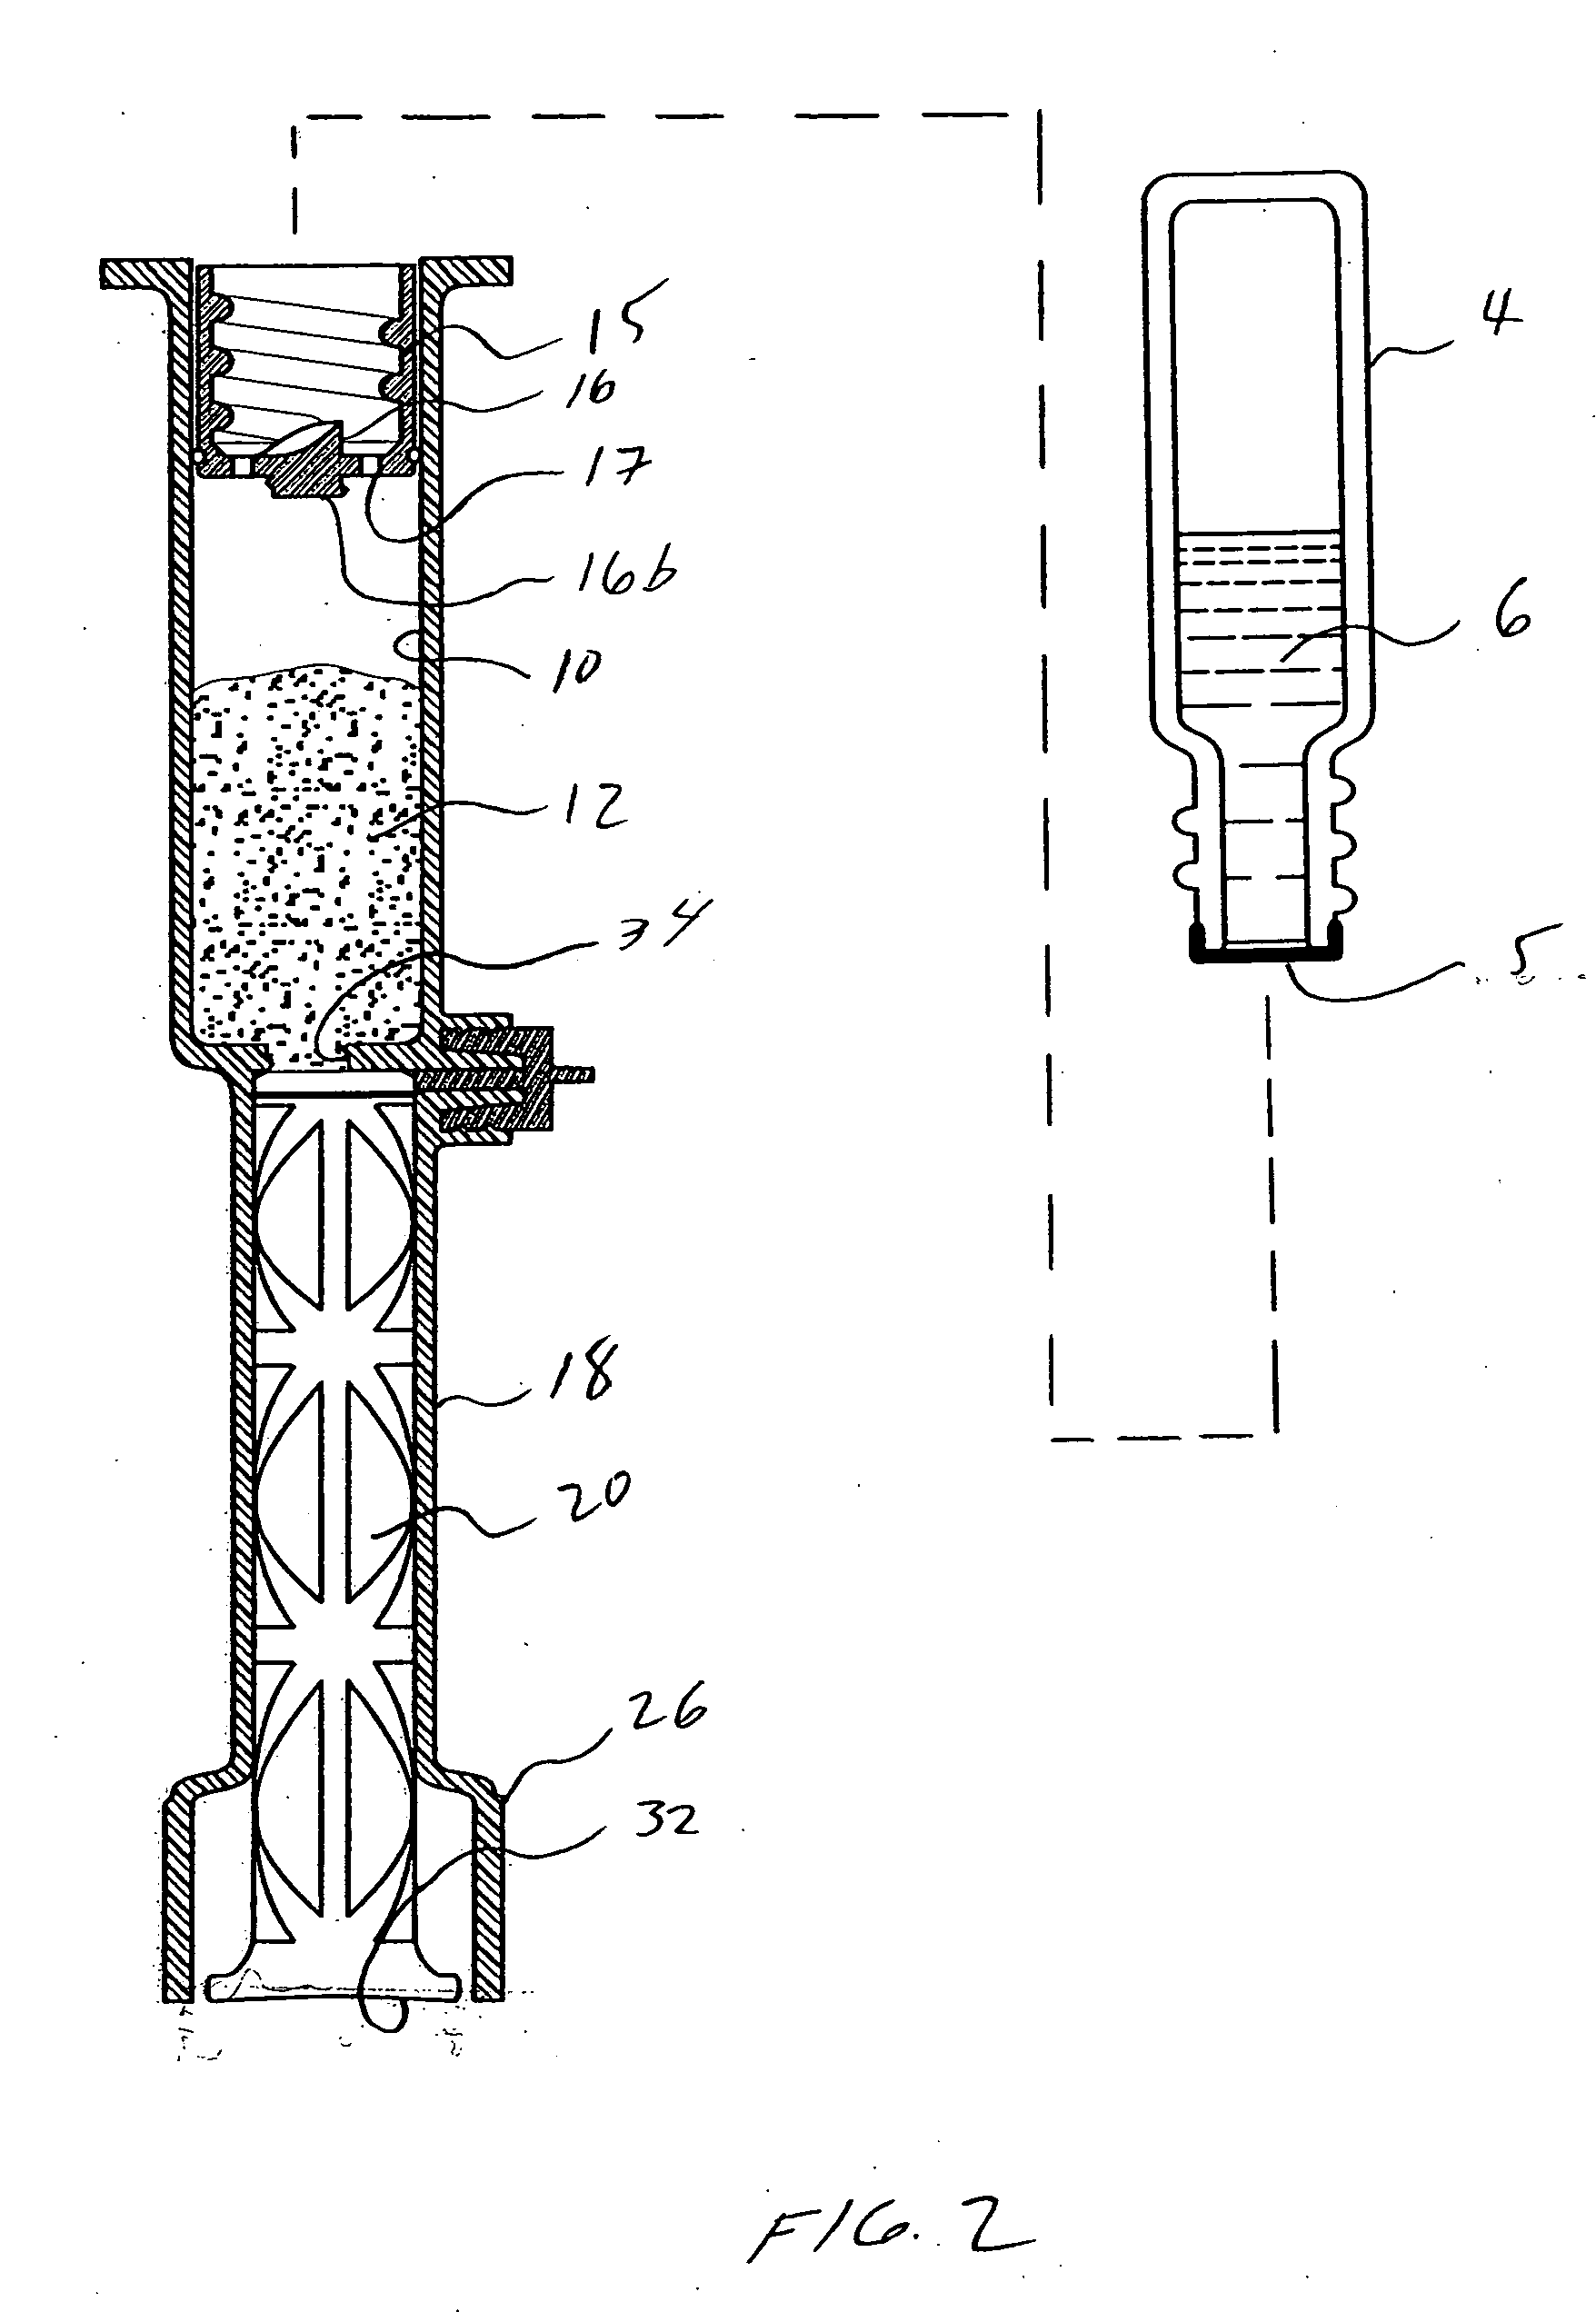 Multi-chamber integrated mixing and delivery system